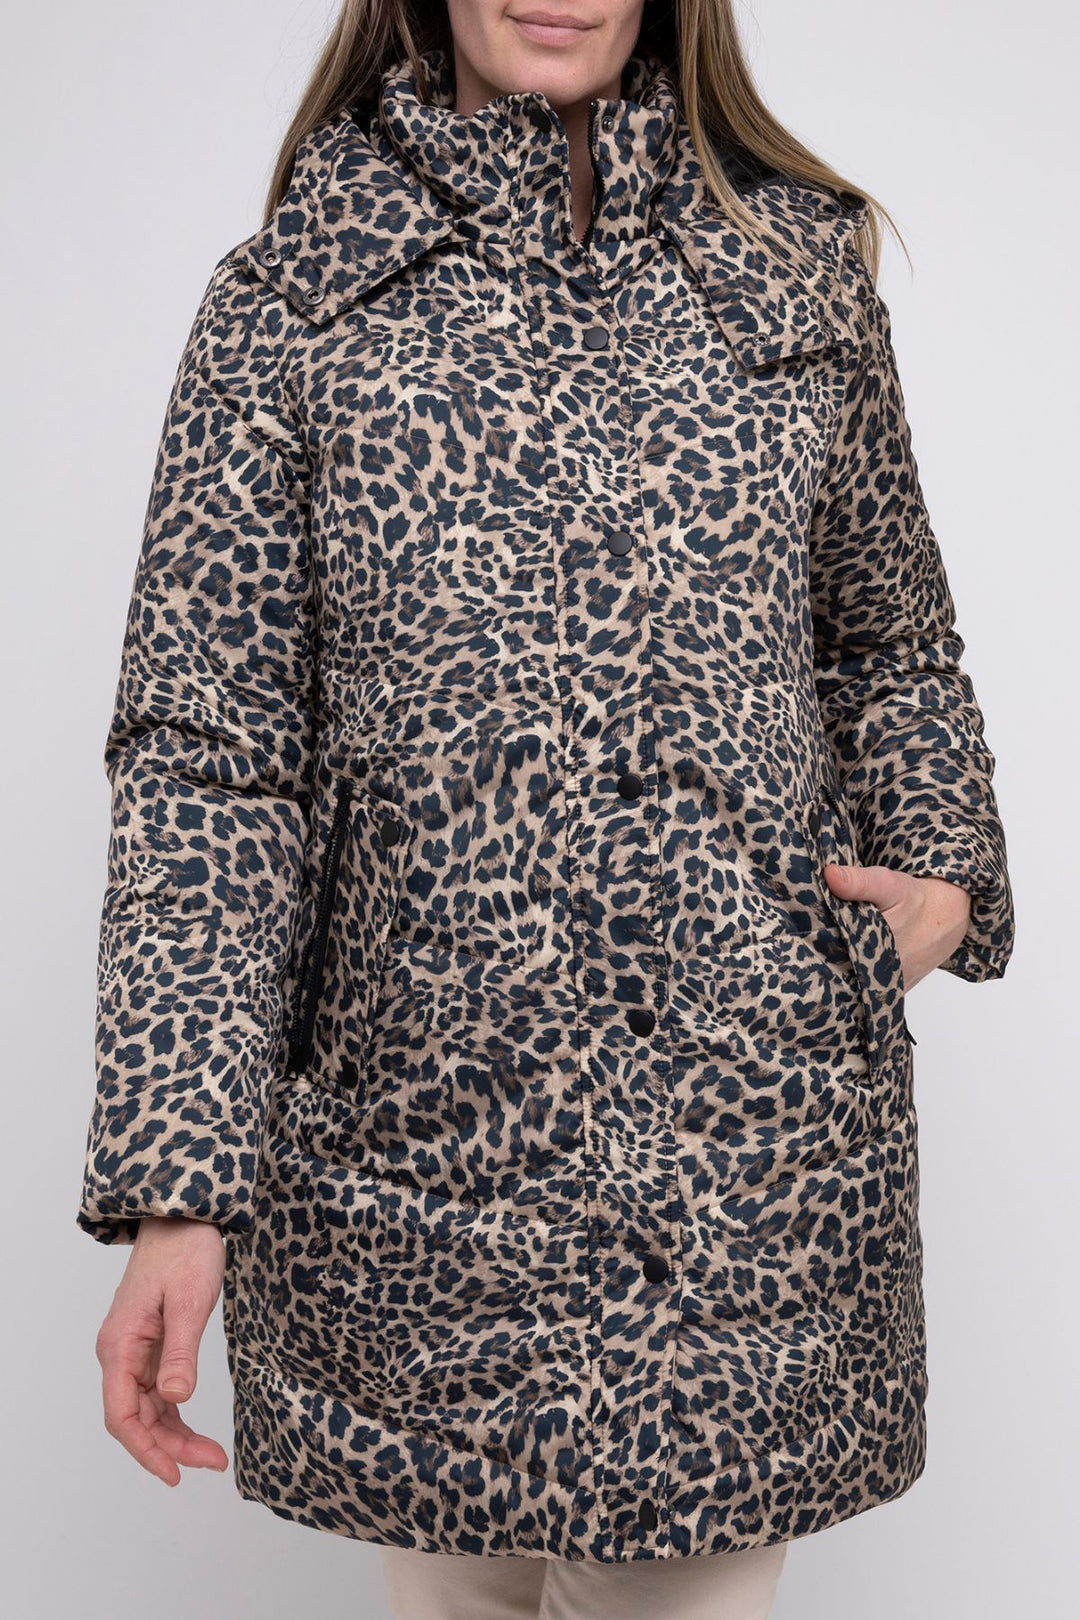 Woman wearing an animal puffer jacket by Pink Pong, sold and shipped from Pizazz Boutique Nelson Bay women's dresses online Australia front view